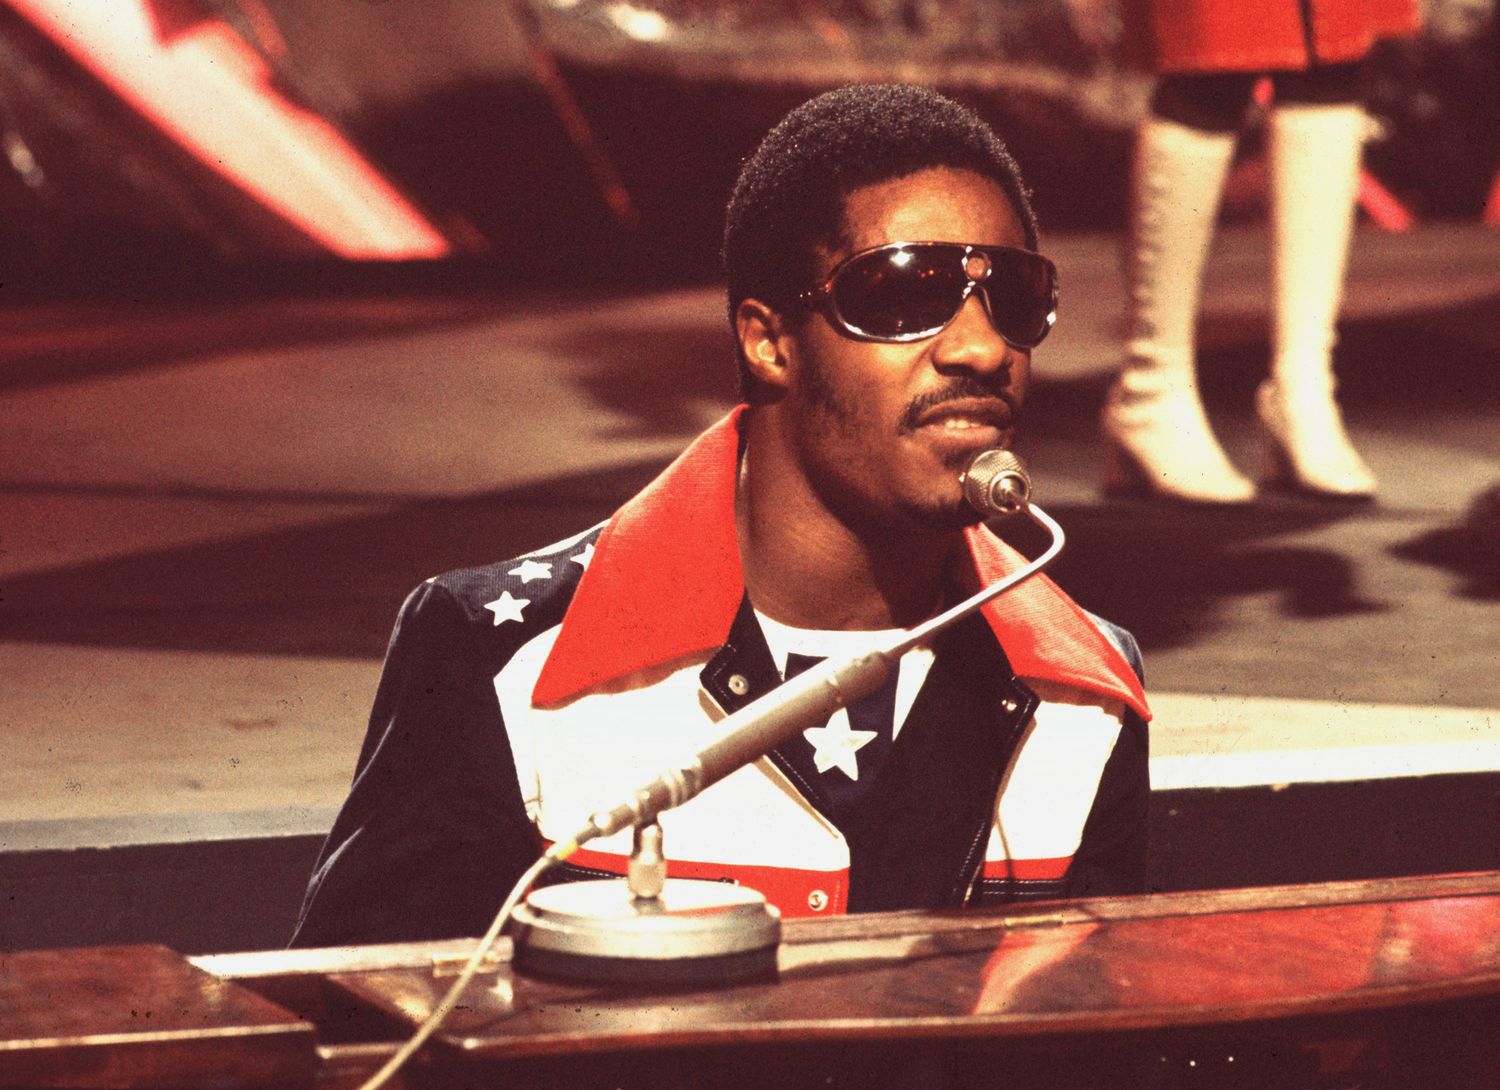 At What Age Did Singer-Songwriter Stevie Wonder Sign With Motown Records?